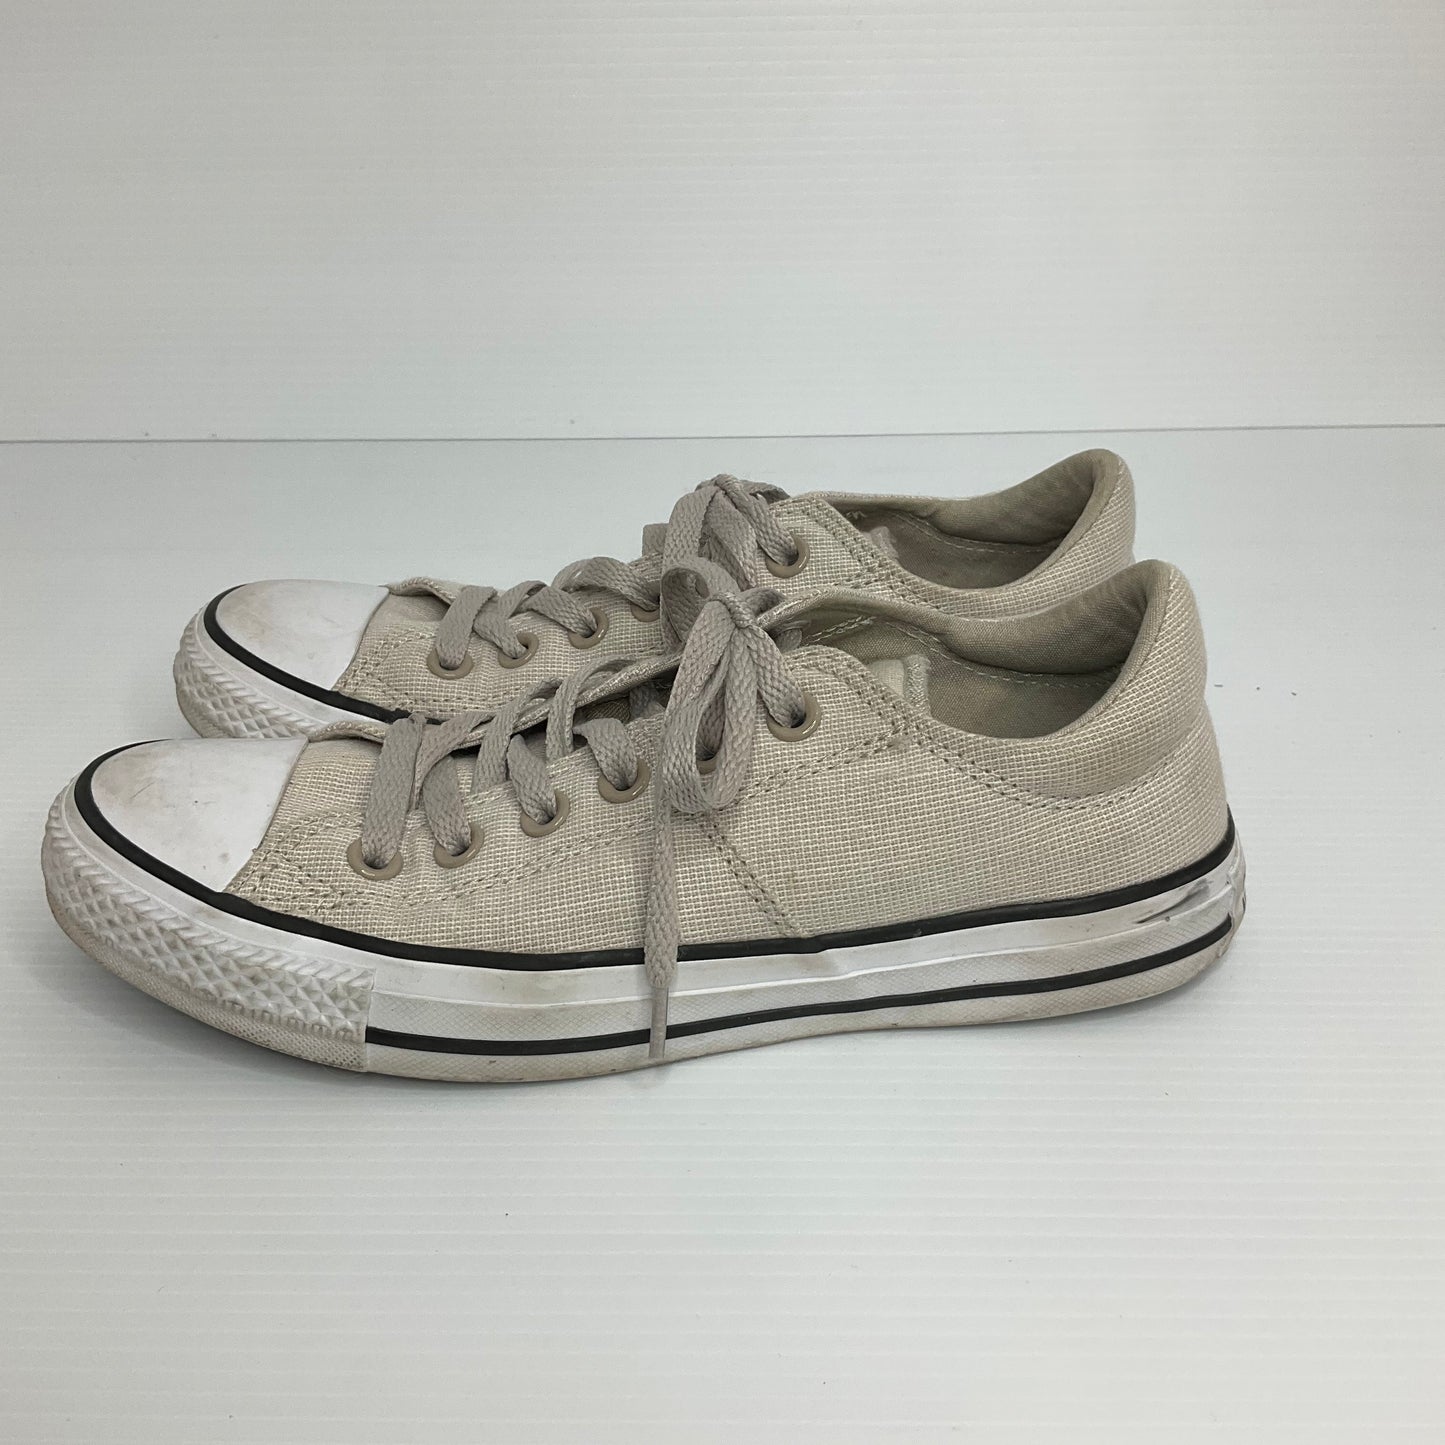 Tan Shoes Sneakers Converse, Size 7.5